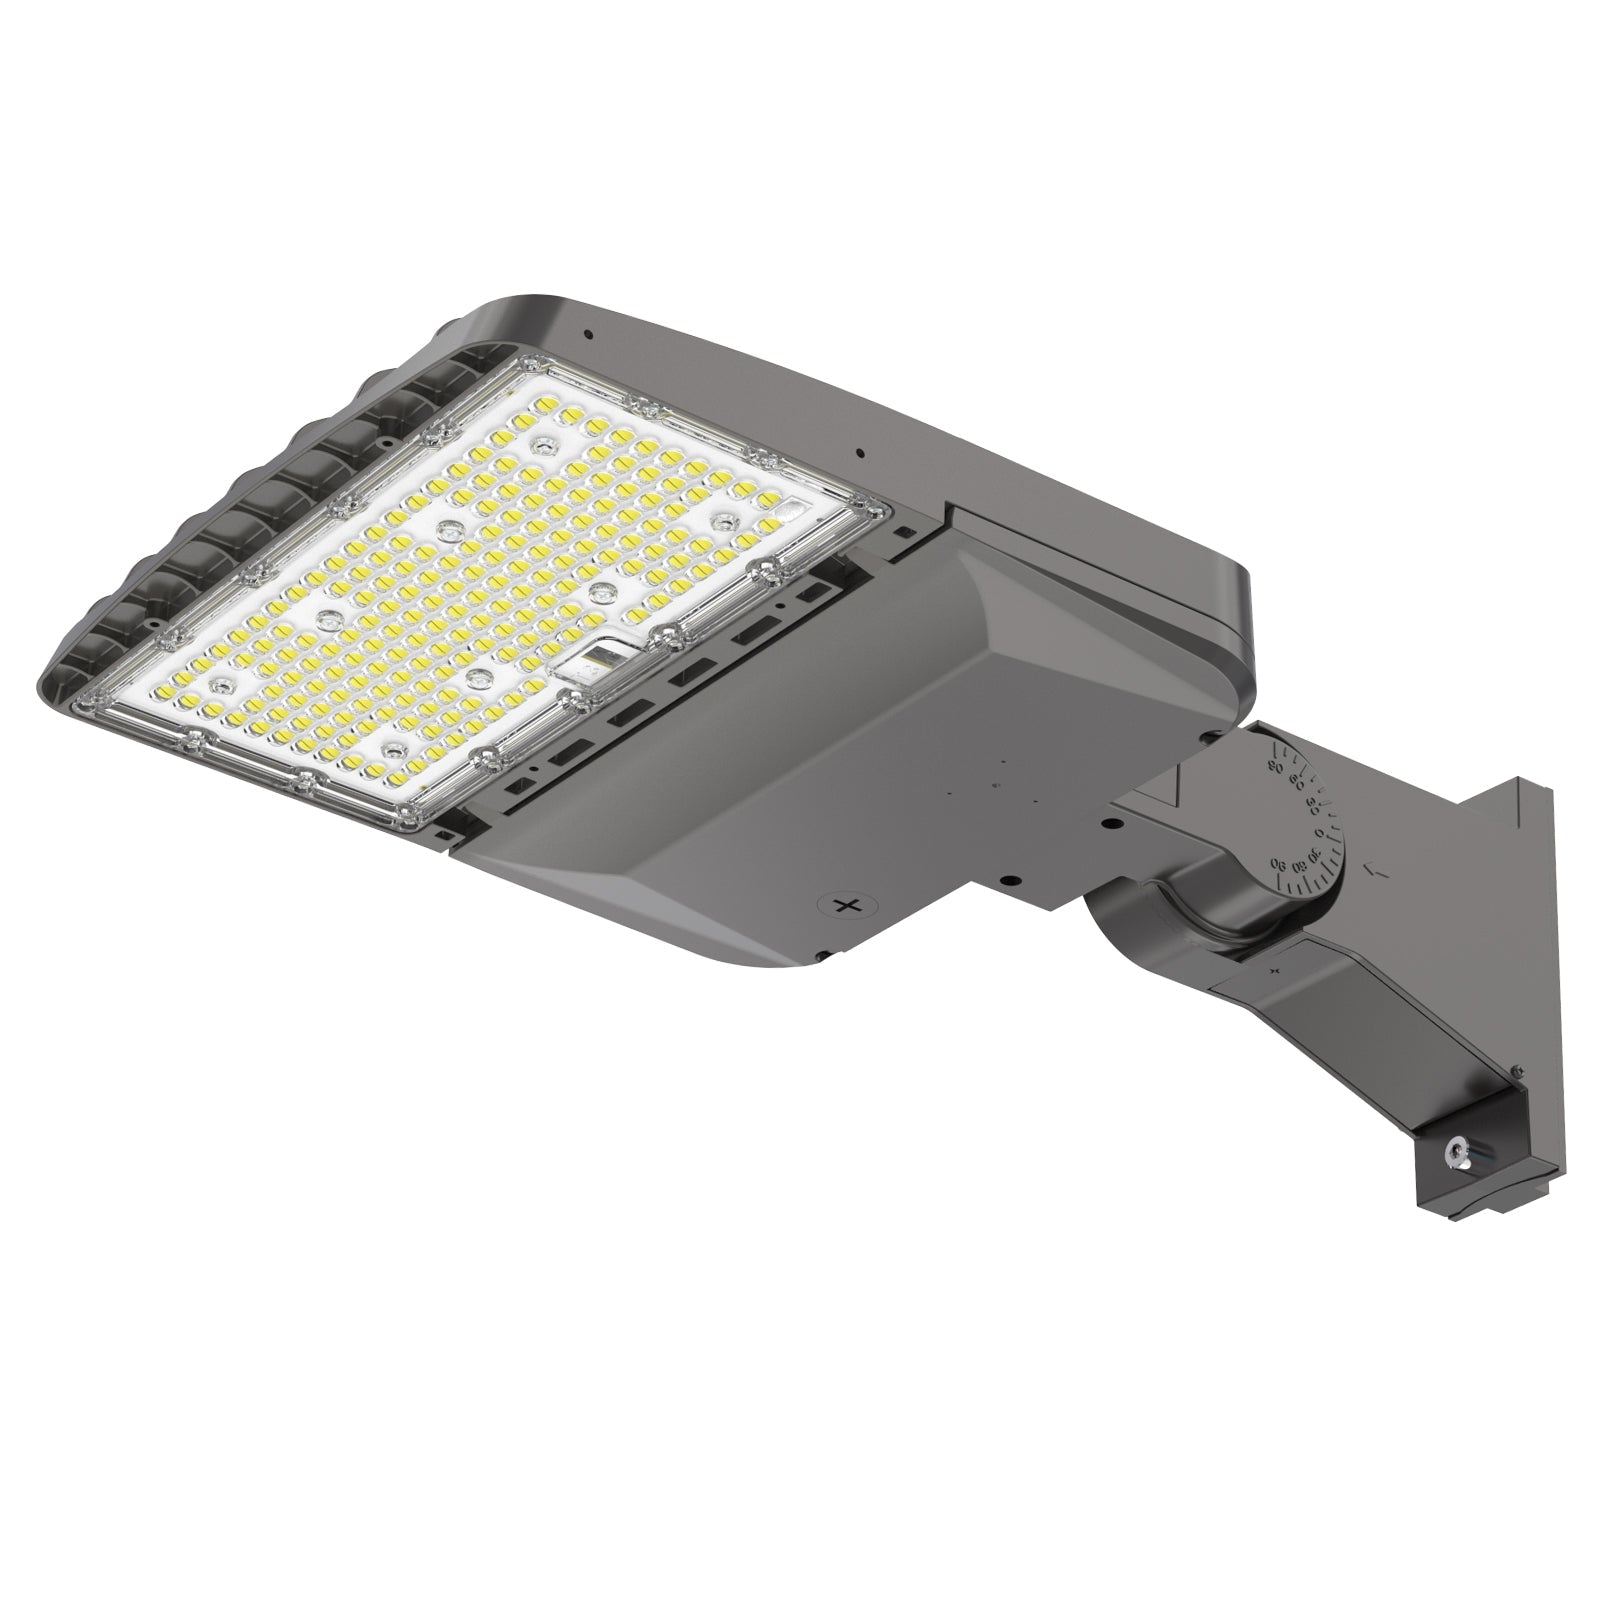 Commercial XALH Series Area Light - Without Shortcap, AC 277V-480V, 5000K, 0-10V Dimmable